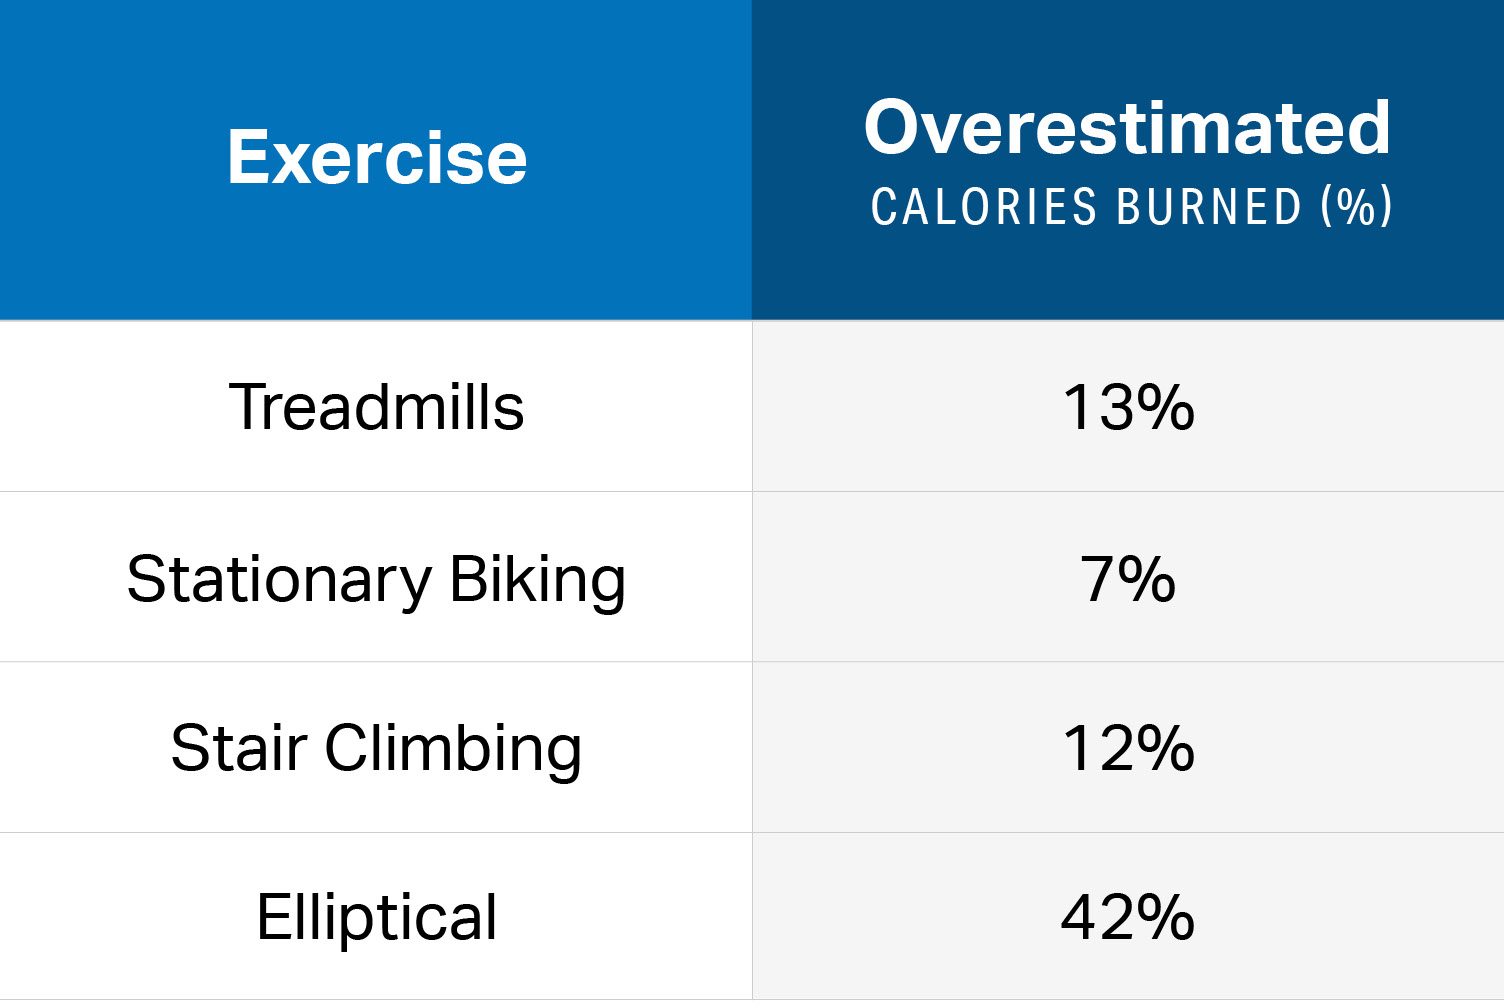 How Many Calories Do I Need When Bulking: Muscle Building Calculator -  Robor Fitness